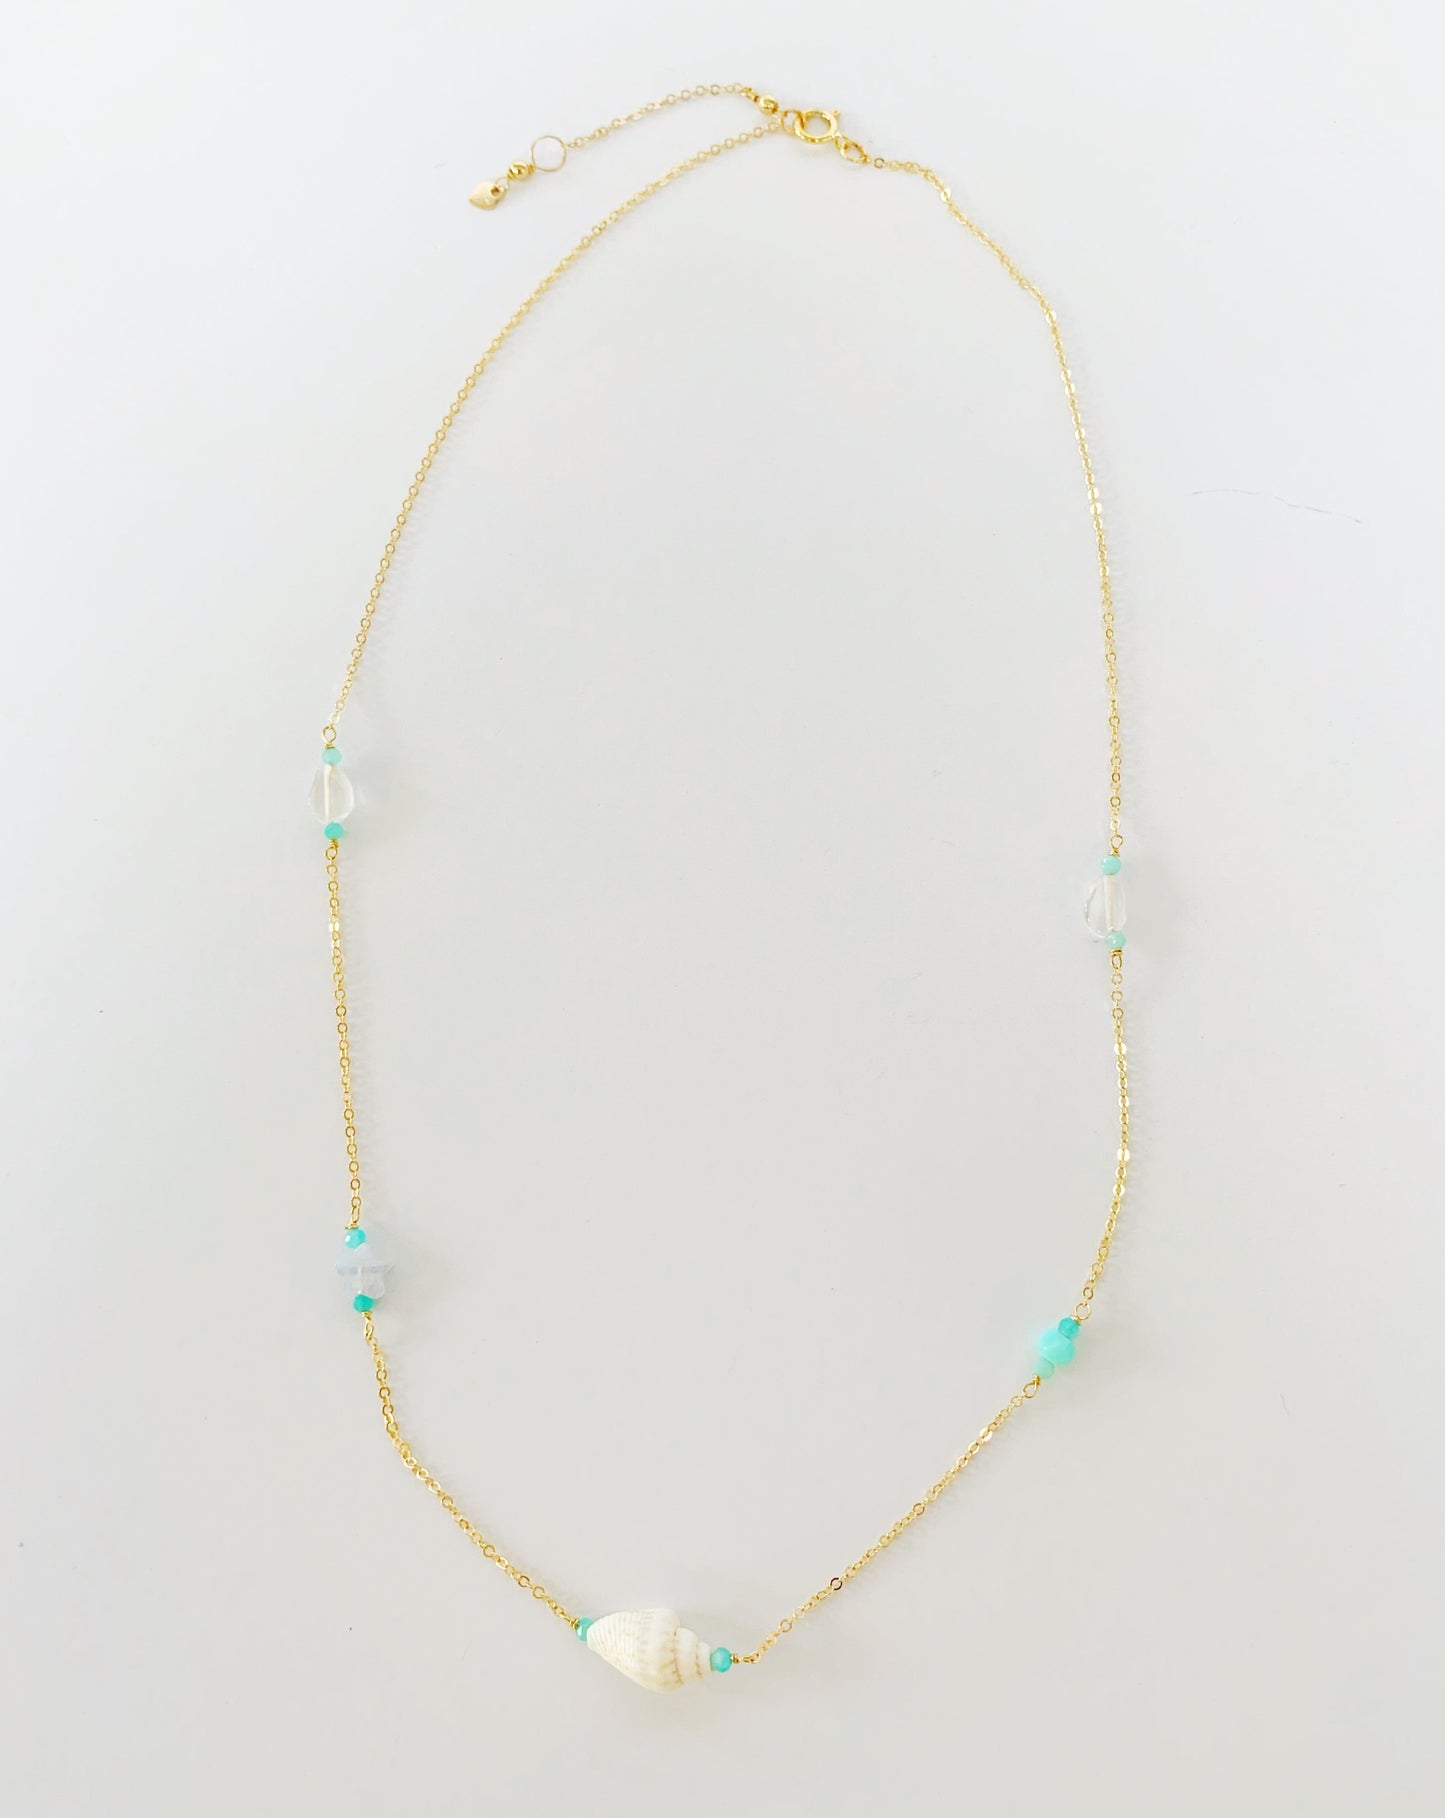 The island hopper necklace is a station necklace with 5 stations, a shell at center and then semiprecious stones for the remaining 4 including rose quartz, peruvian opal, blue lace agate, amazonite. clasped at the 17" length. The necklace is photographed flat on a white background